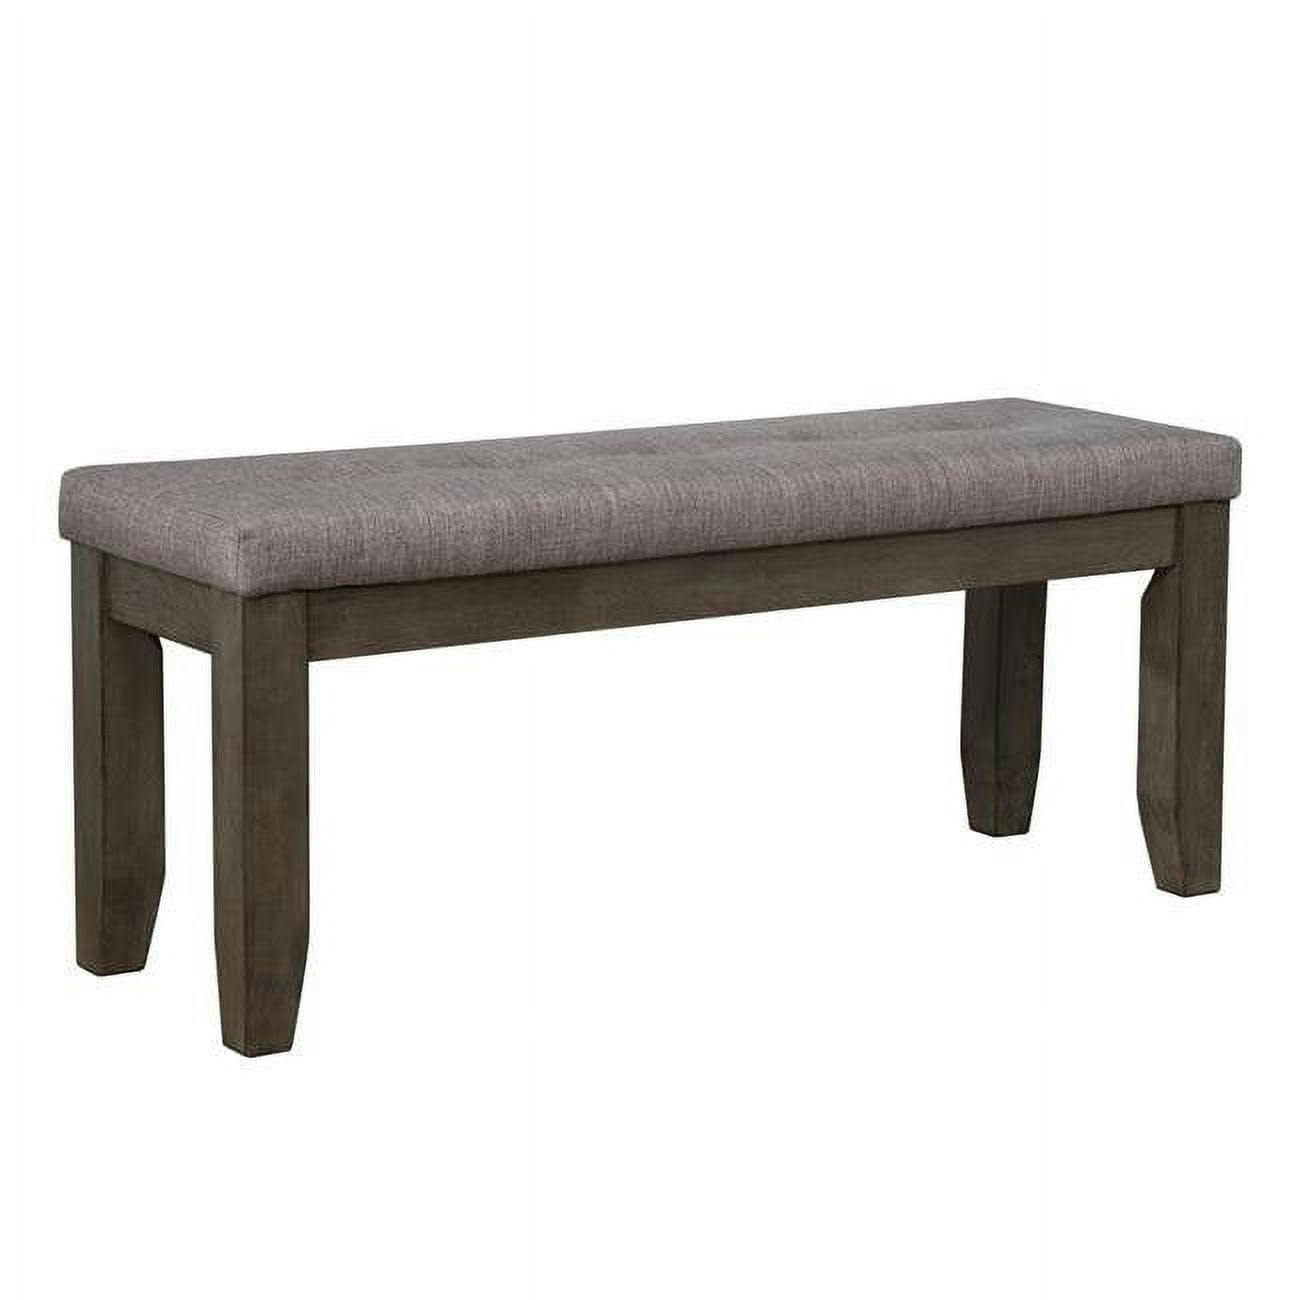 Elegant Dual-Tone Wood and Fabric Bench, Brown & Gray, 48"